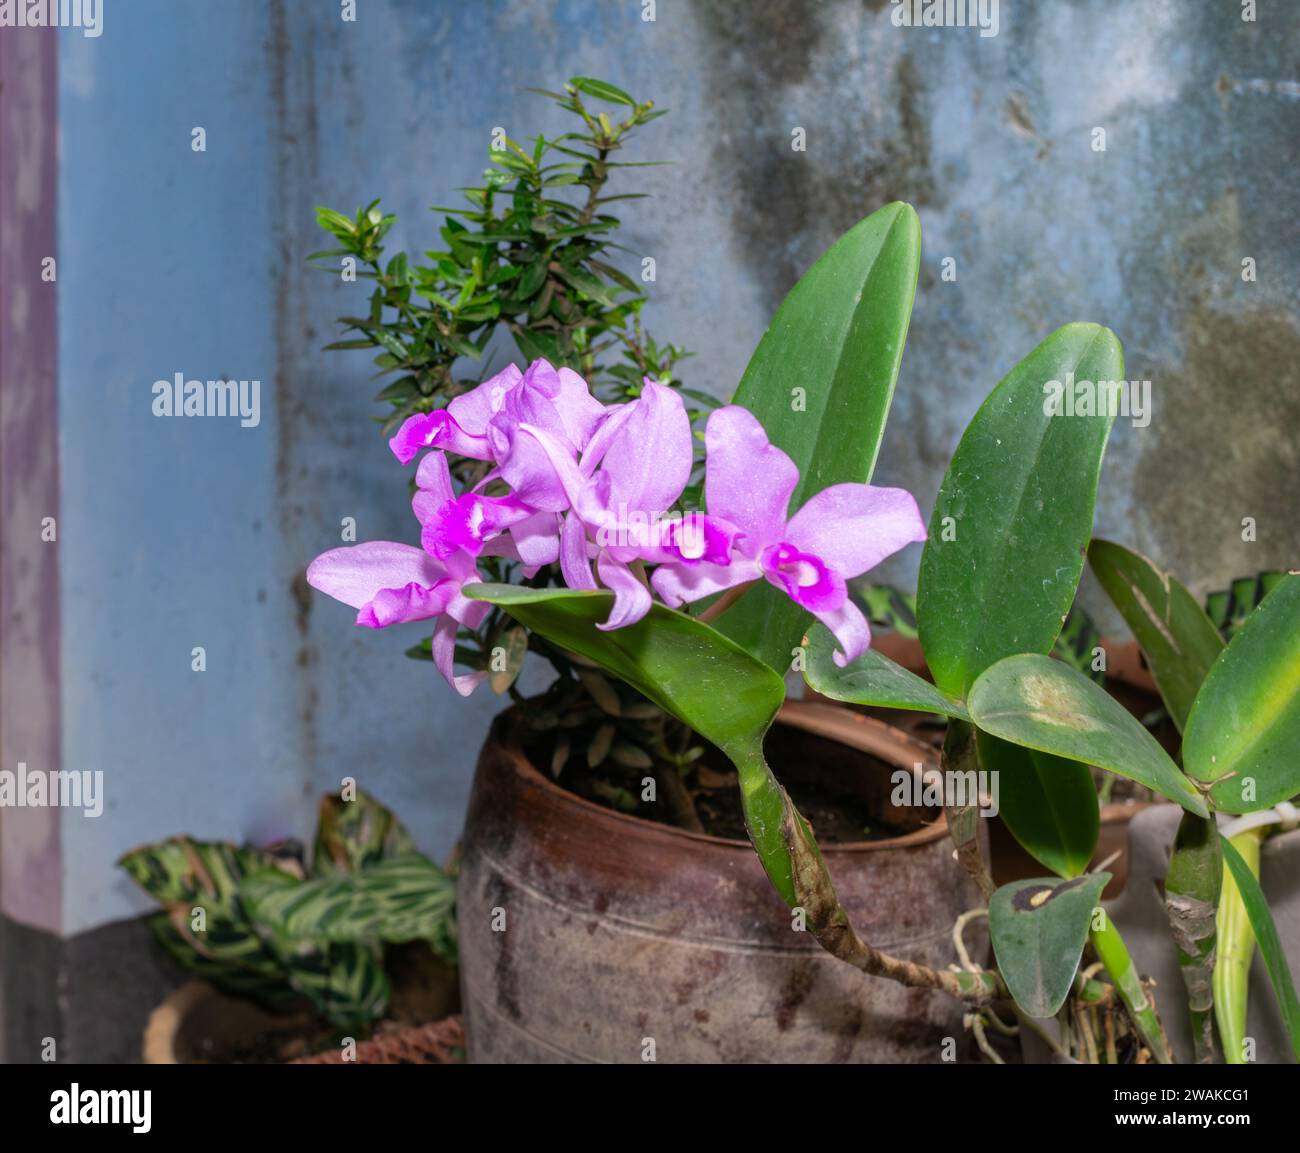 Guarianthe skinneri blooming in a Jinotega, Nicaragua, courtyard.  The plant is endangered in the wild,  One of the orchids used in hybrids. Stock Photo